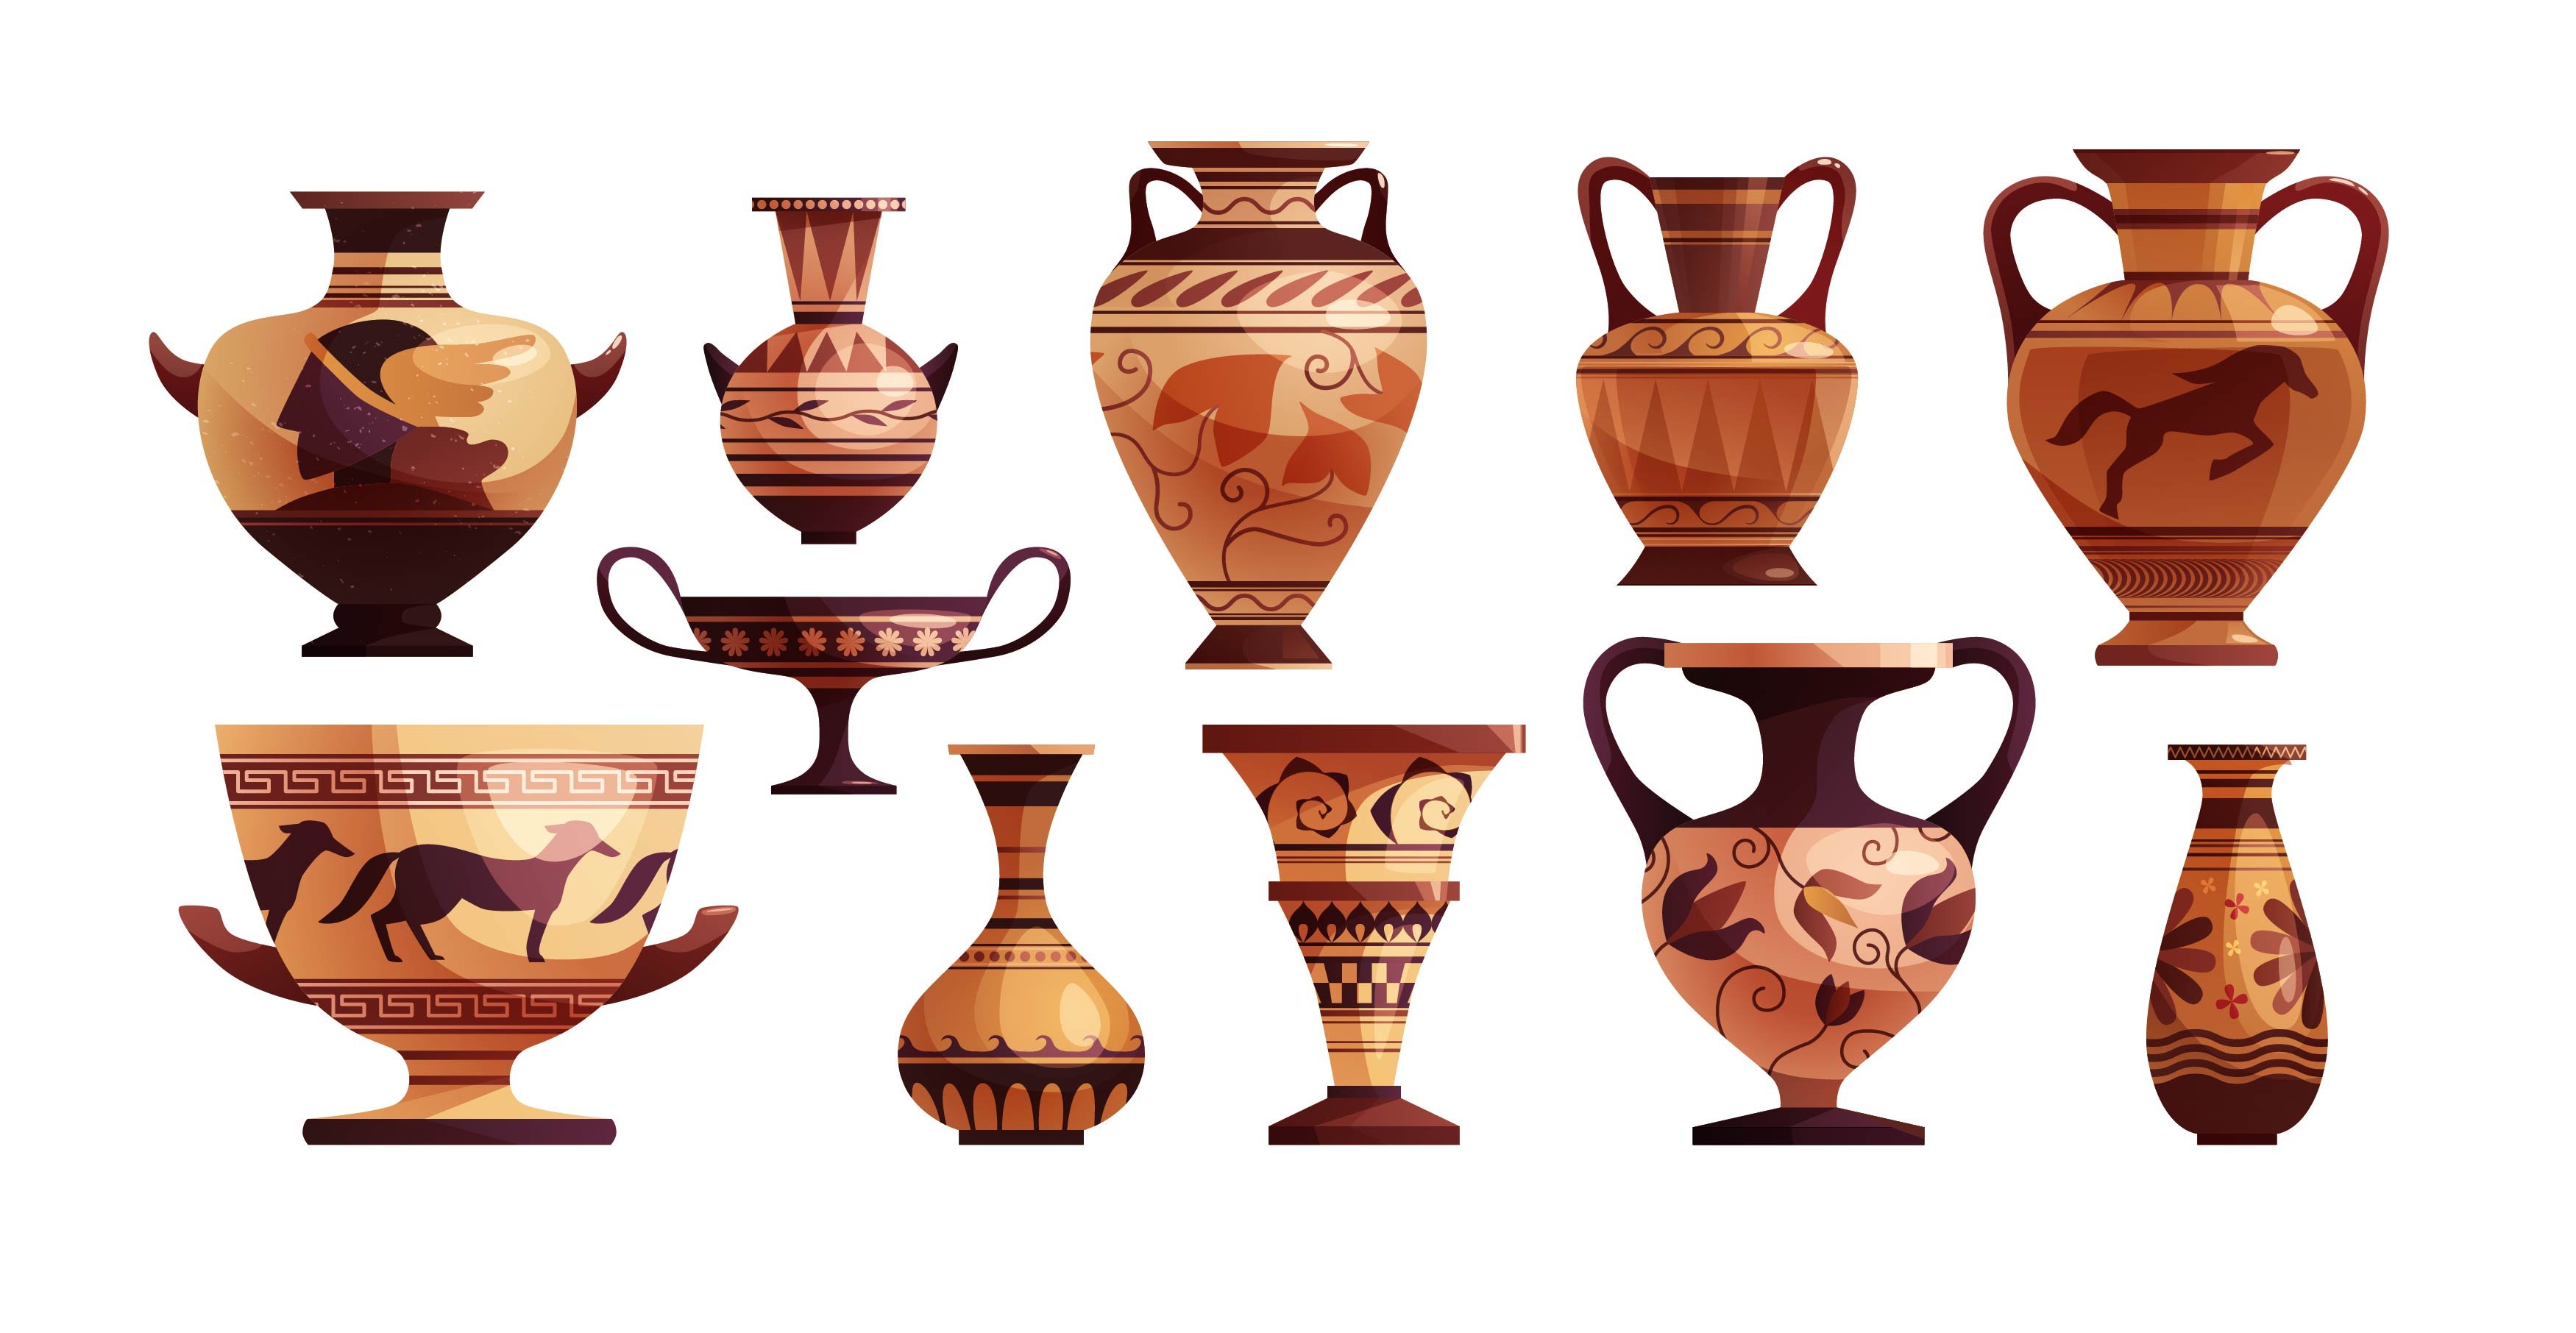 Antique Greek vases with decoration cover image.